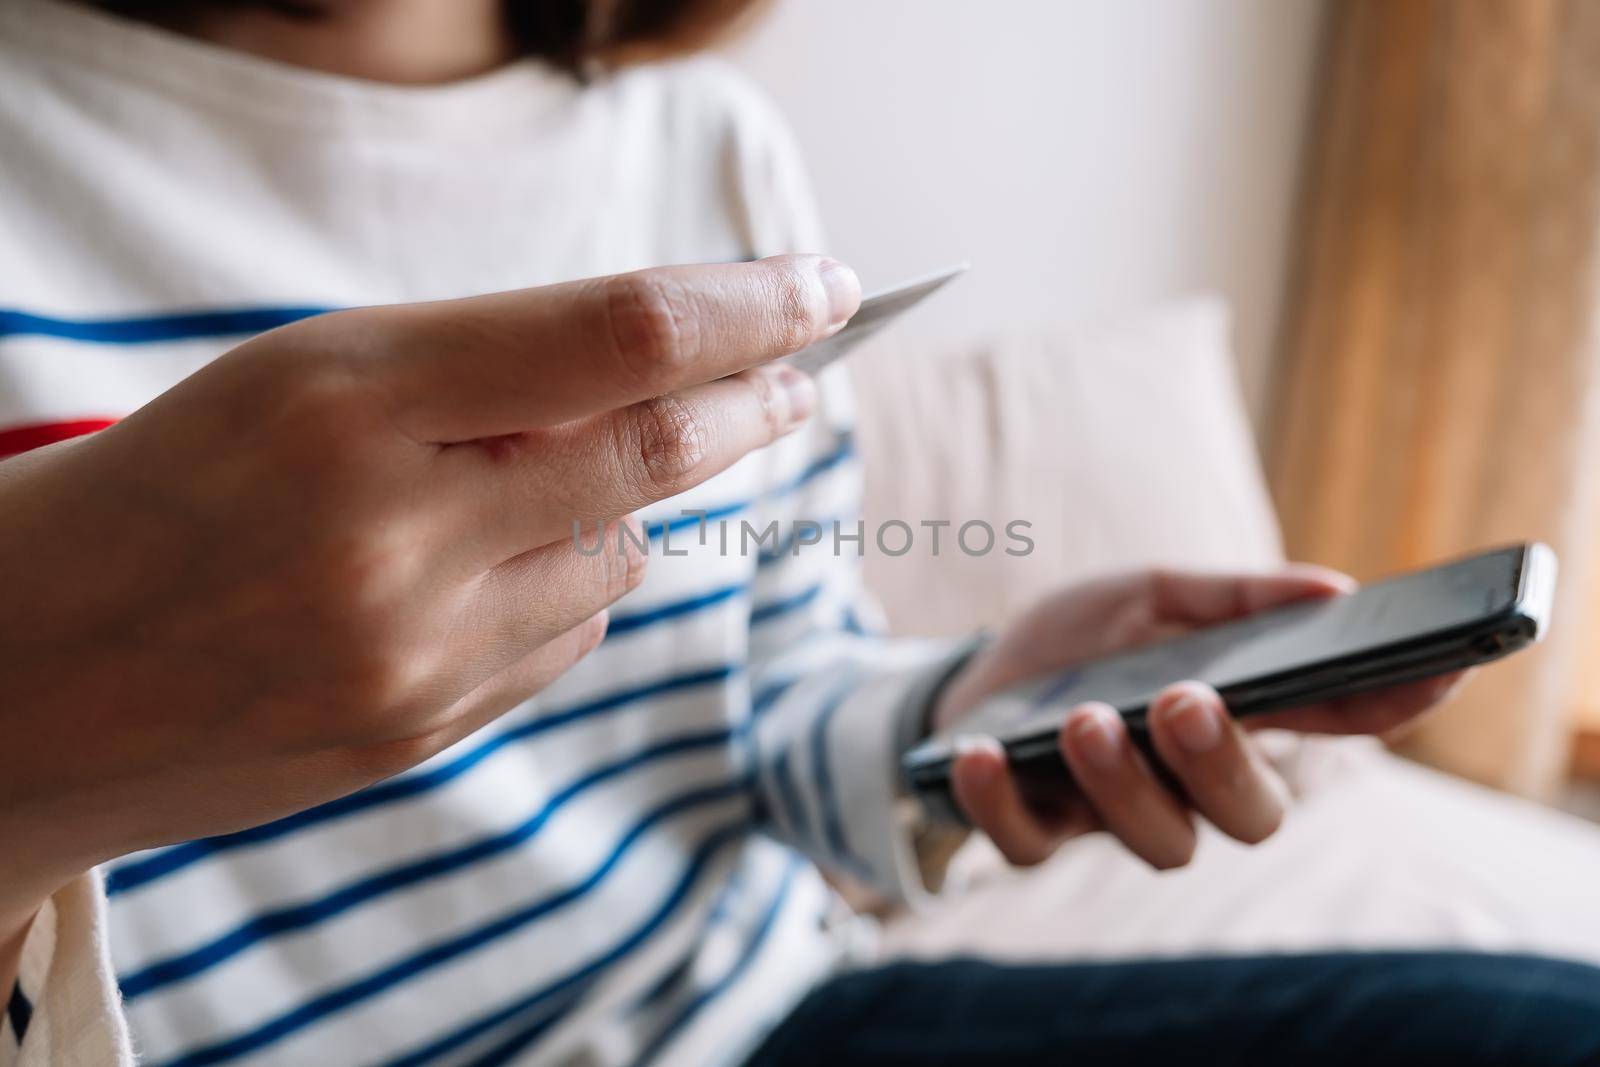 Online shopping payment,Woman's hands holding a smart phone and credit card by nateemee